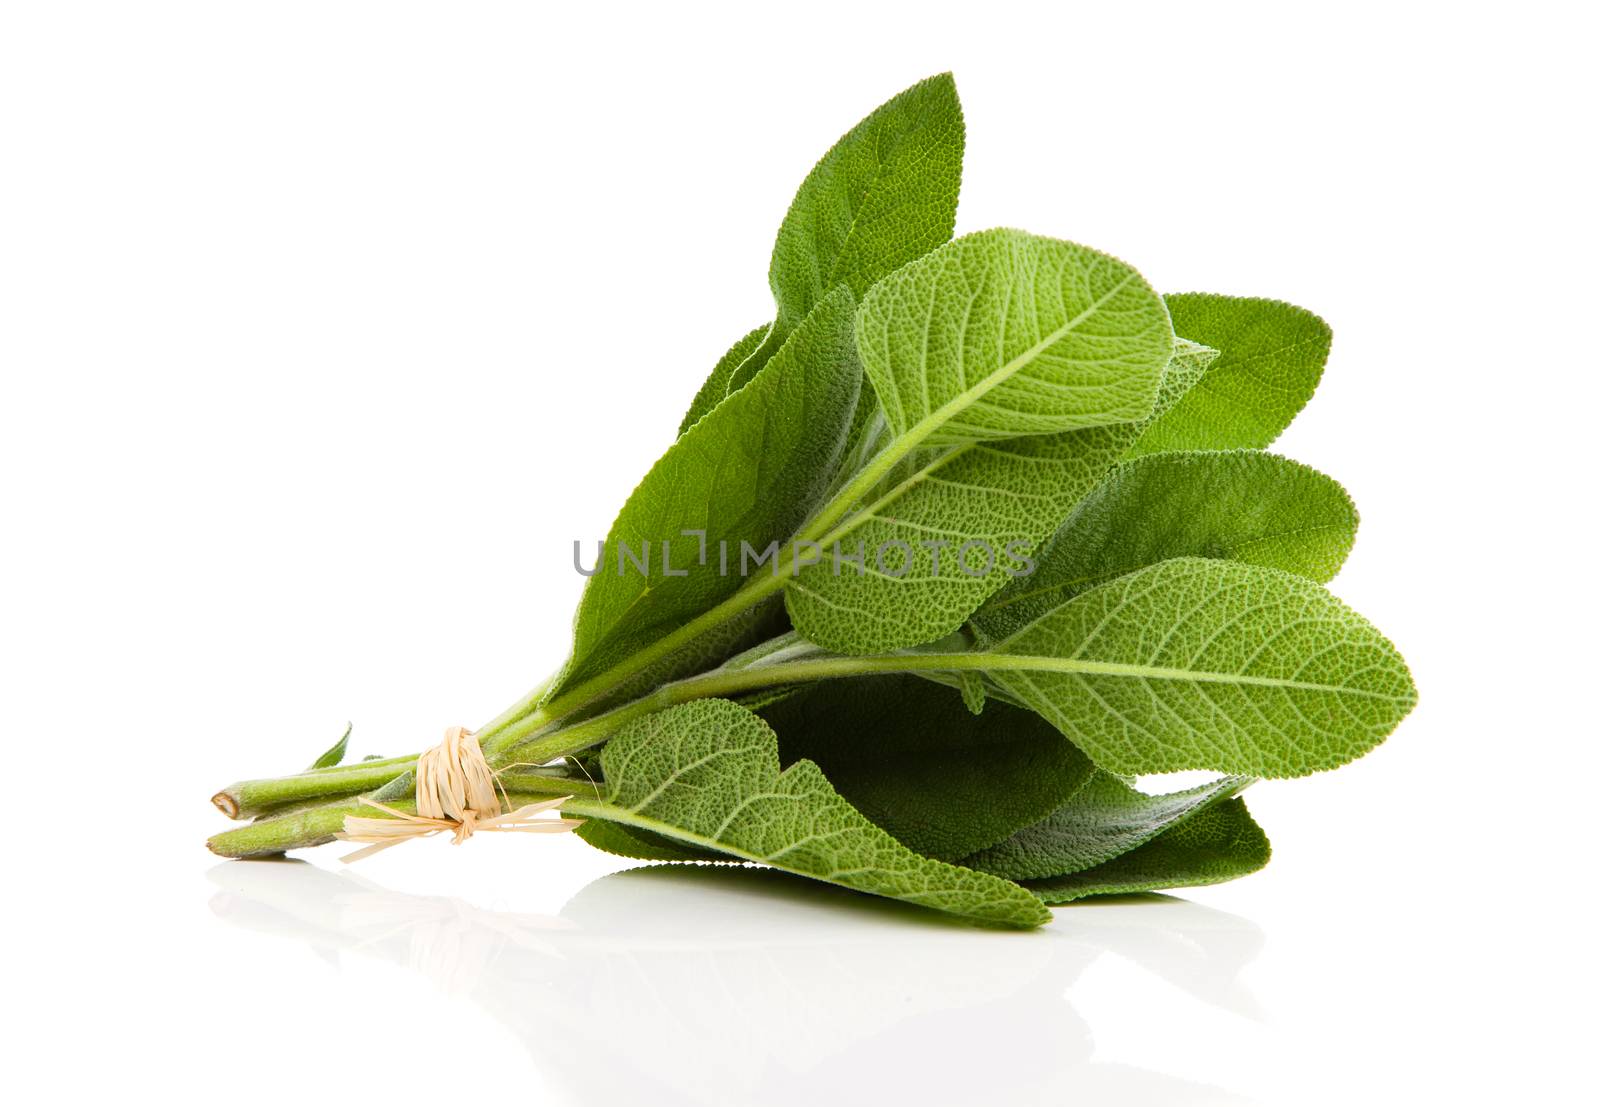 Sage plant on a white background